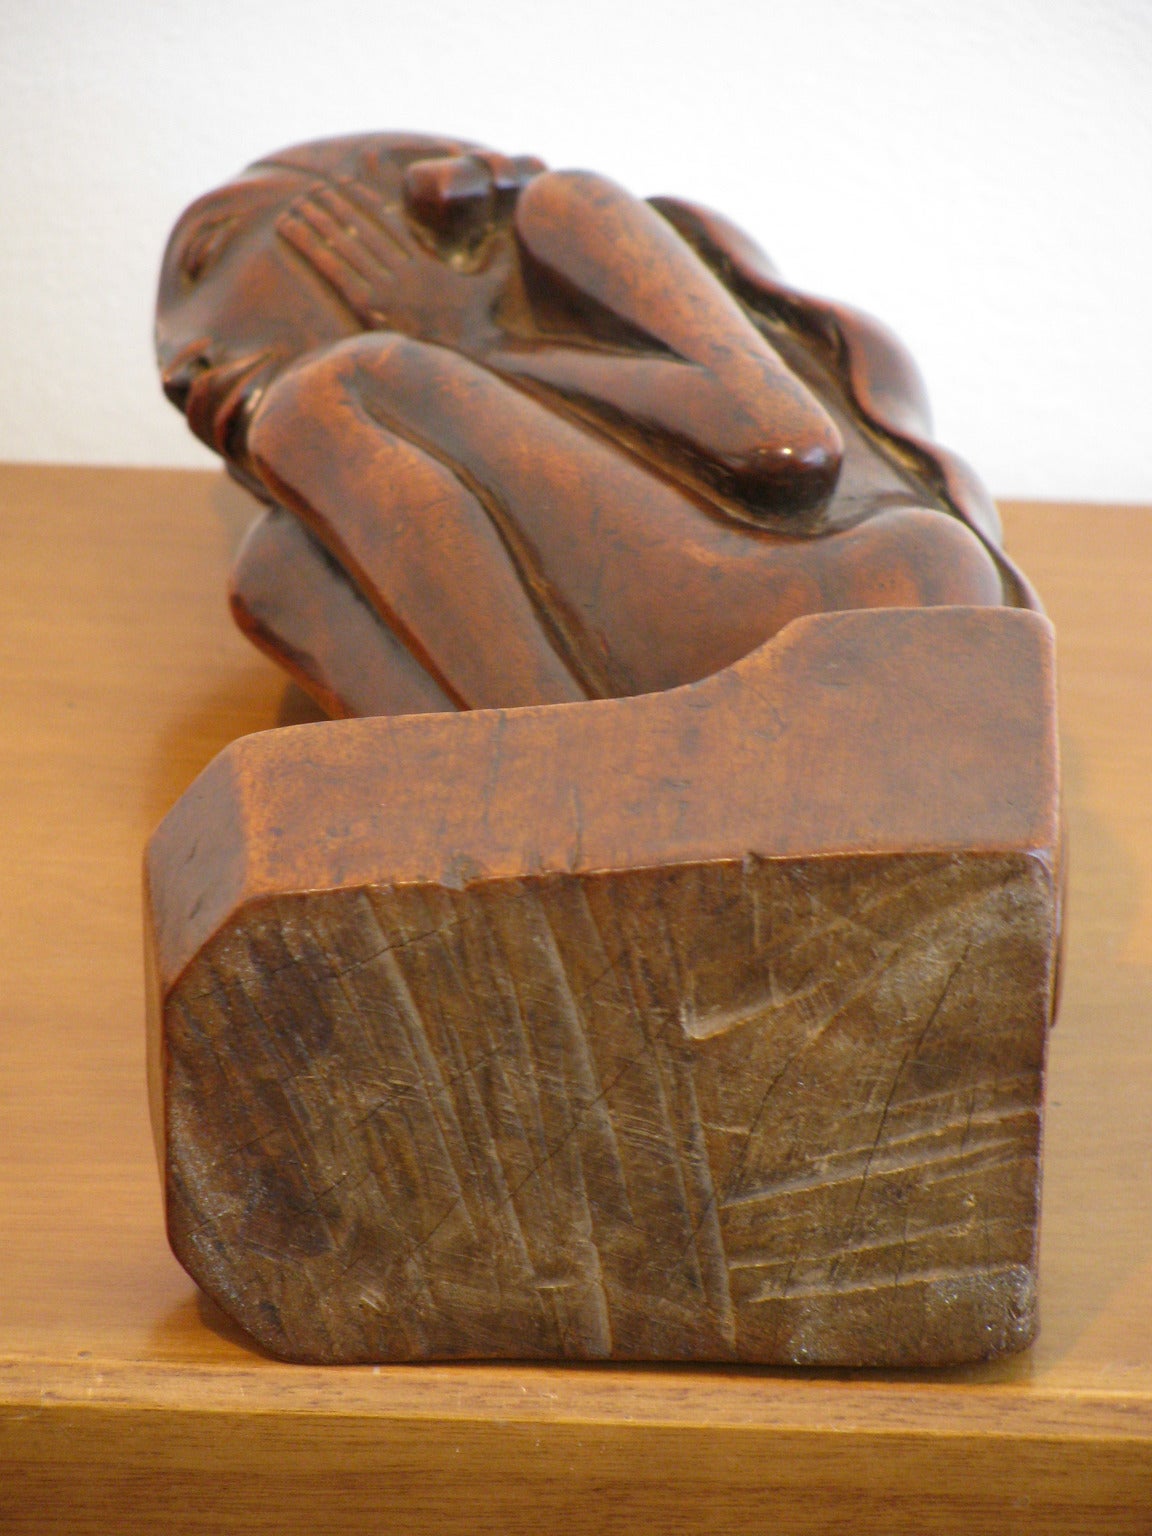 Balinese Wooden Art Deco Sculpture, circa 1935 In Good Condition For Sale In Amsterdam, NL